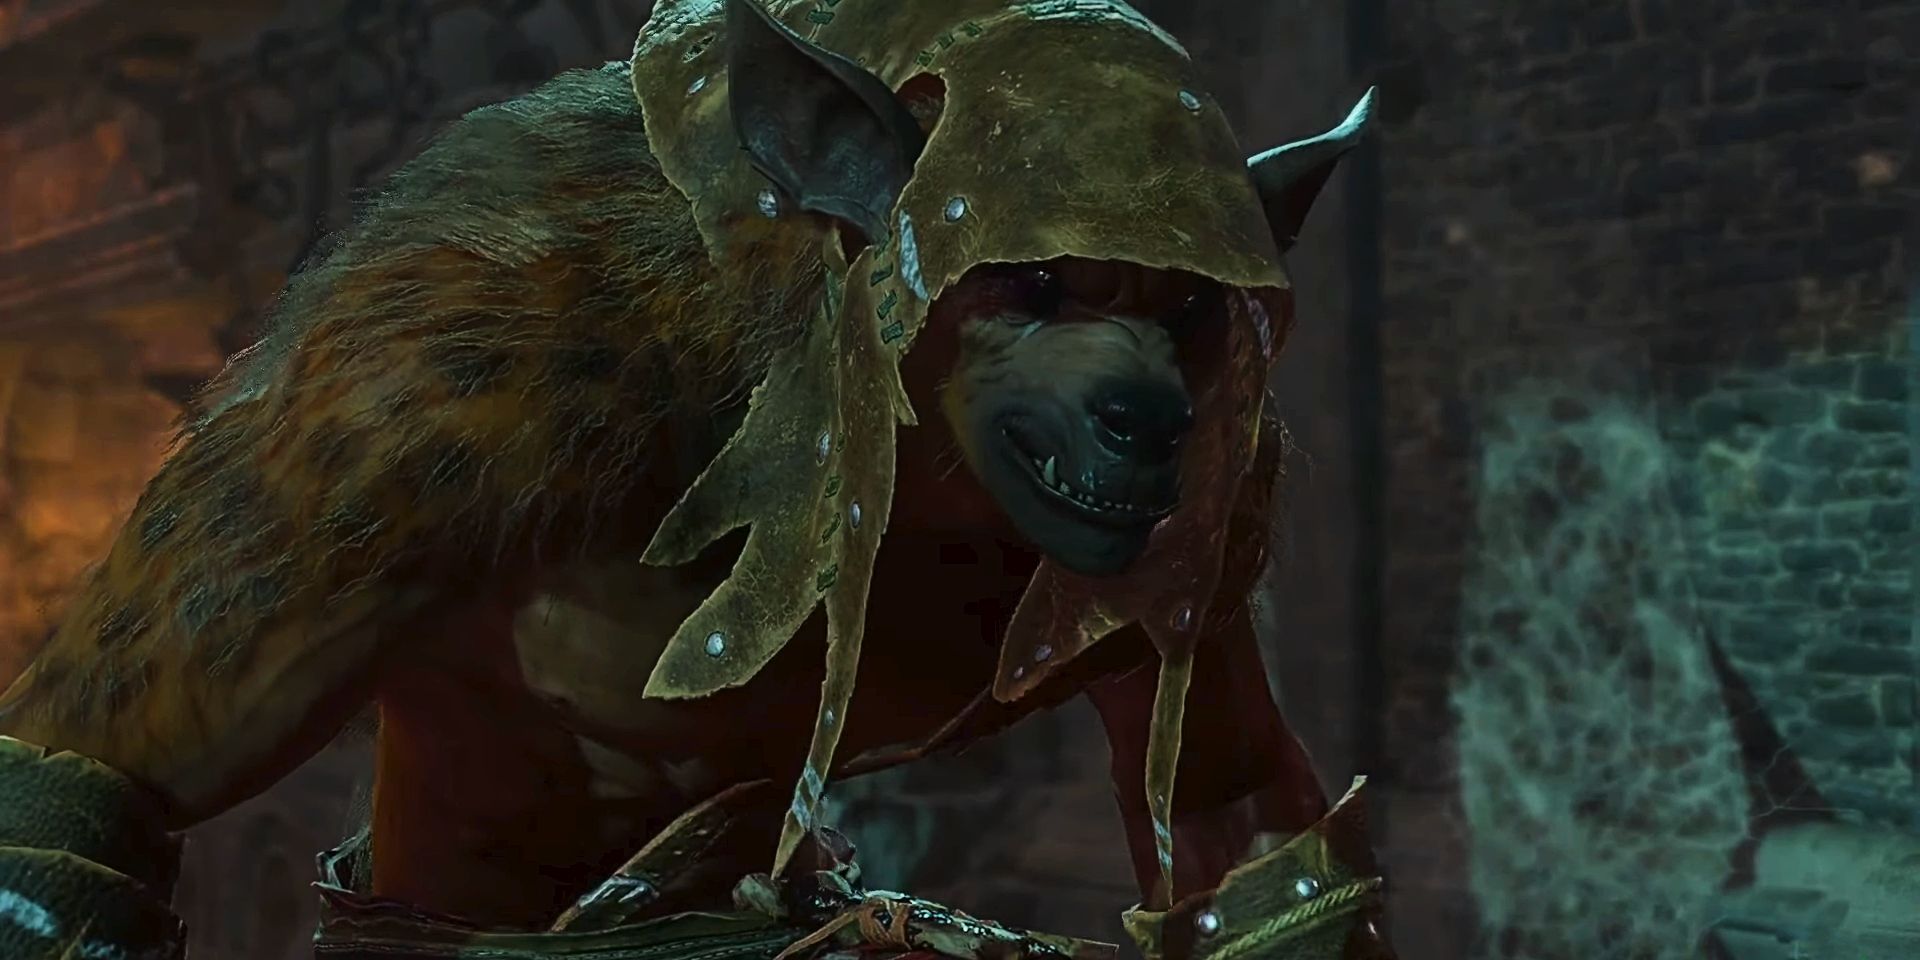 Barnabus, the kitchen gnoll, hunched over in a screenshot from Baldur's Gate 3.